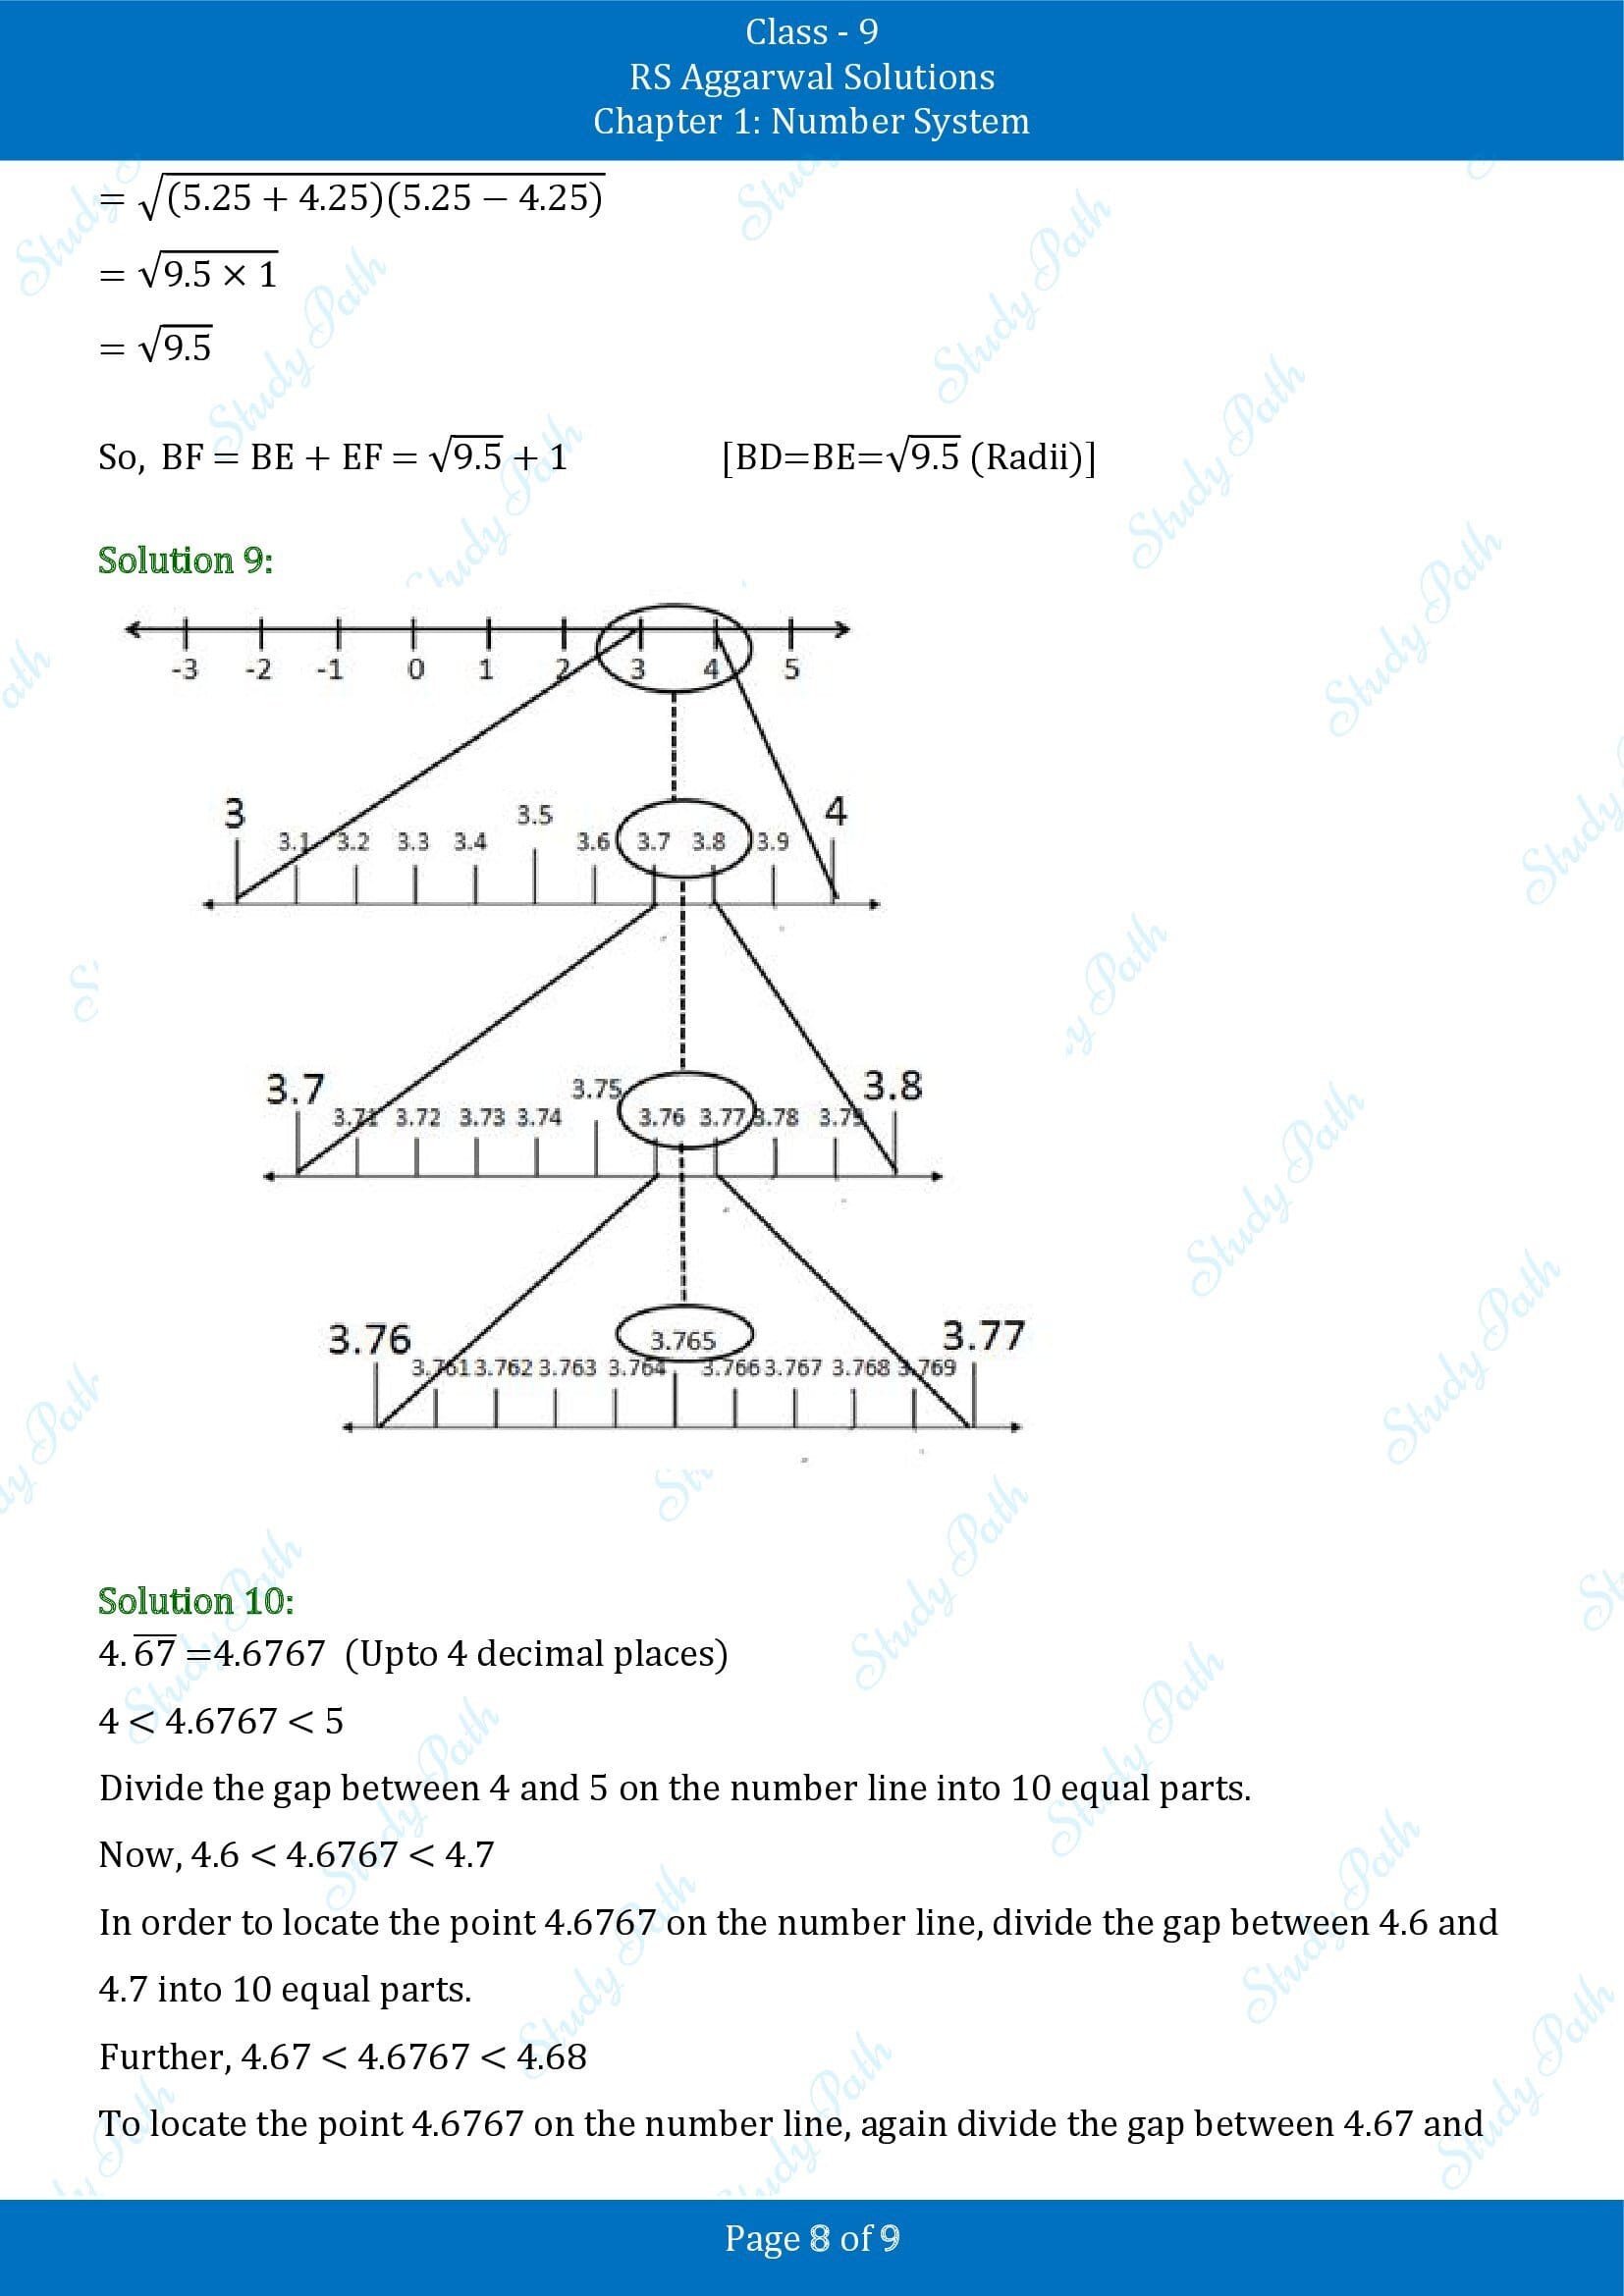 RS Aggarwal Solutions Class 9 Chapter 1 Number System Exercise 1E 00008